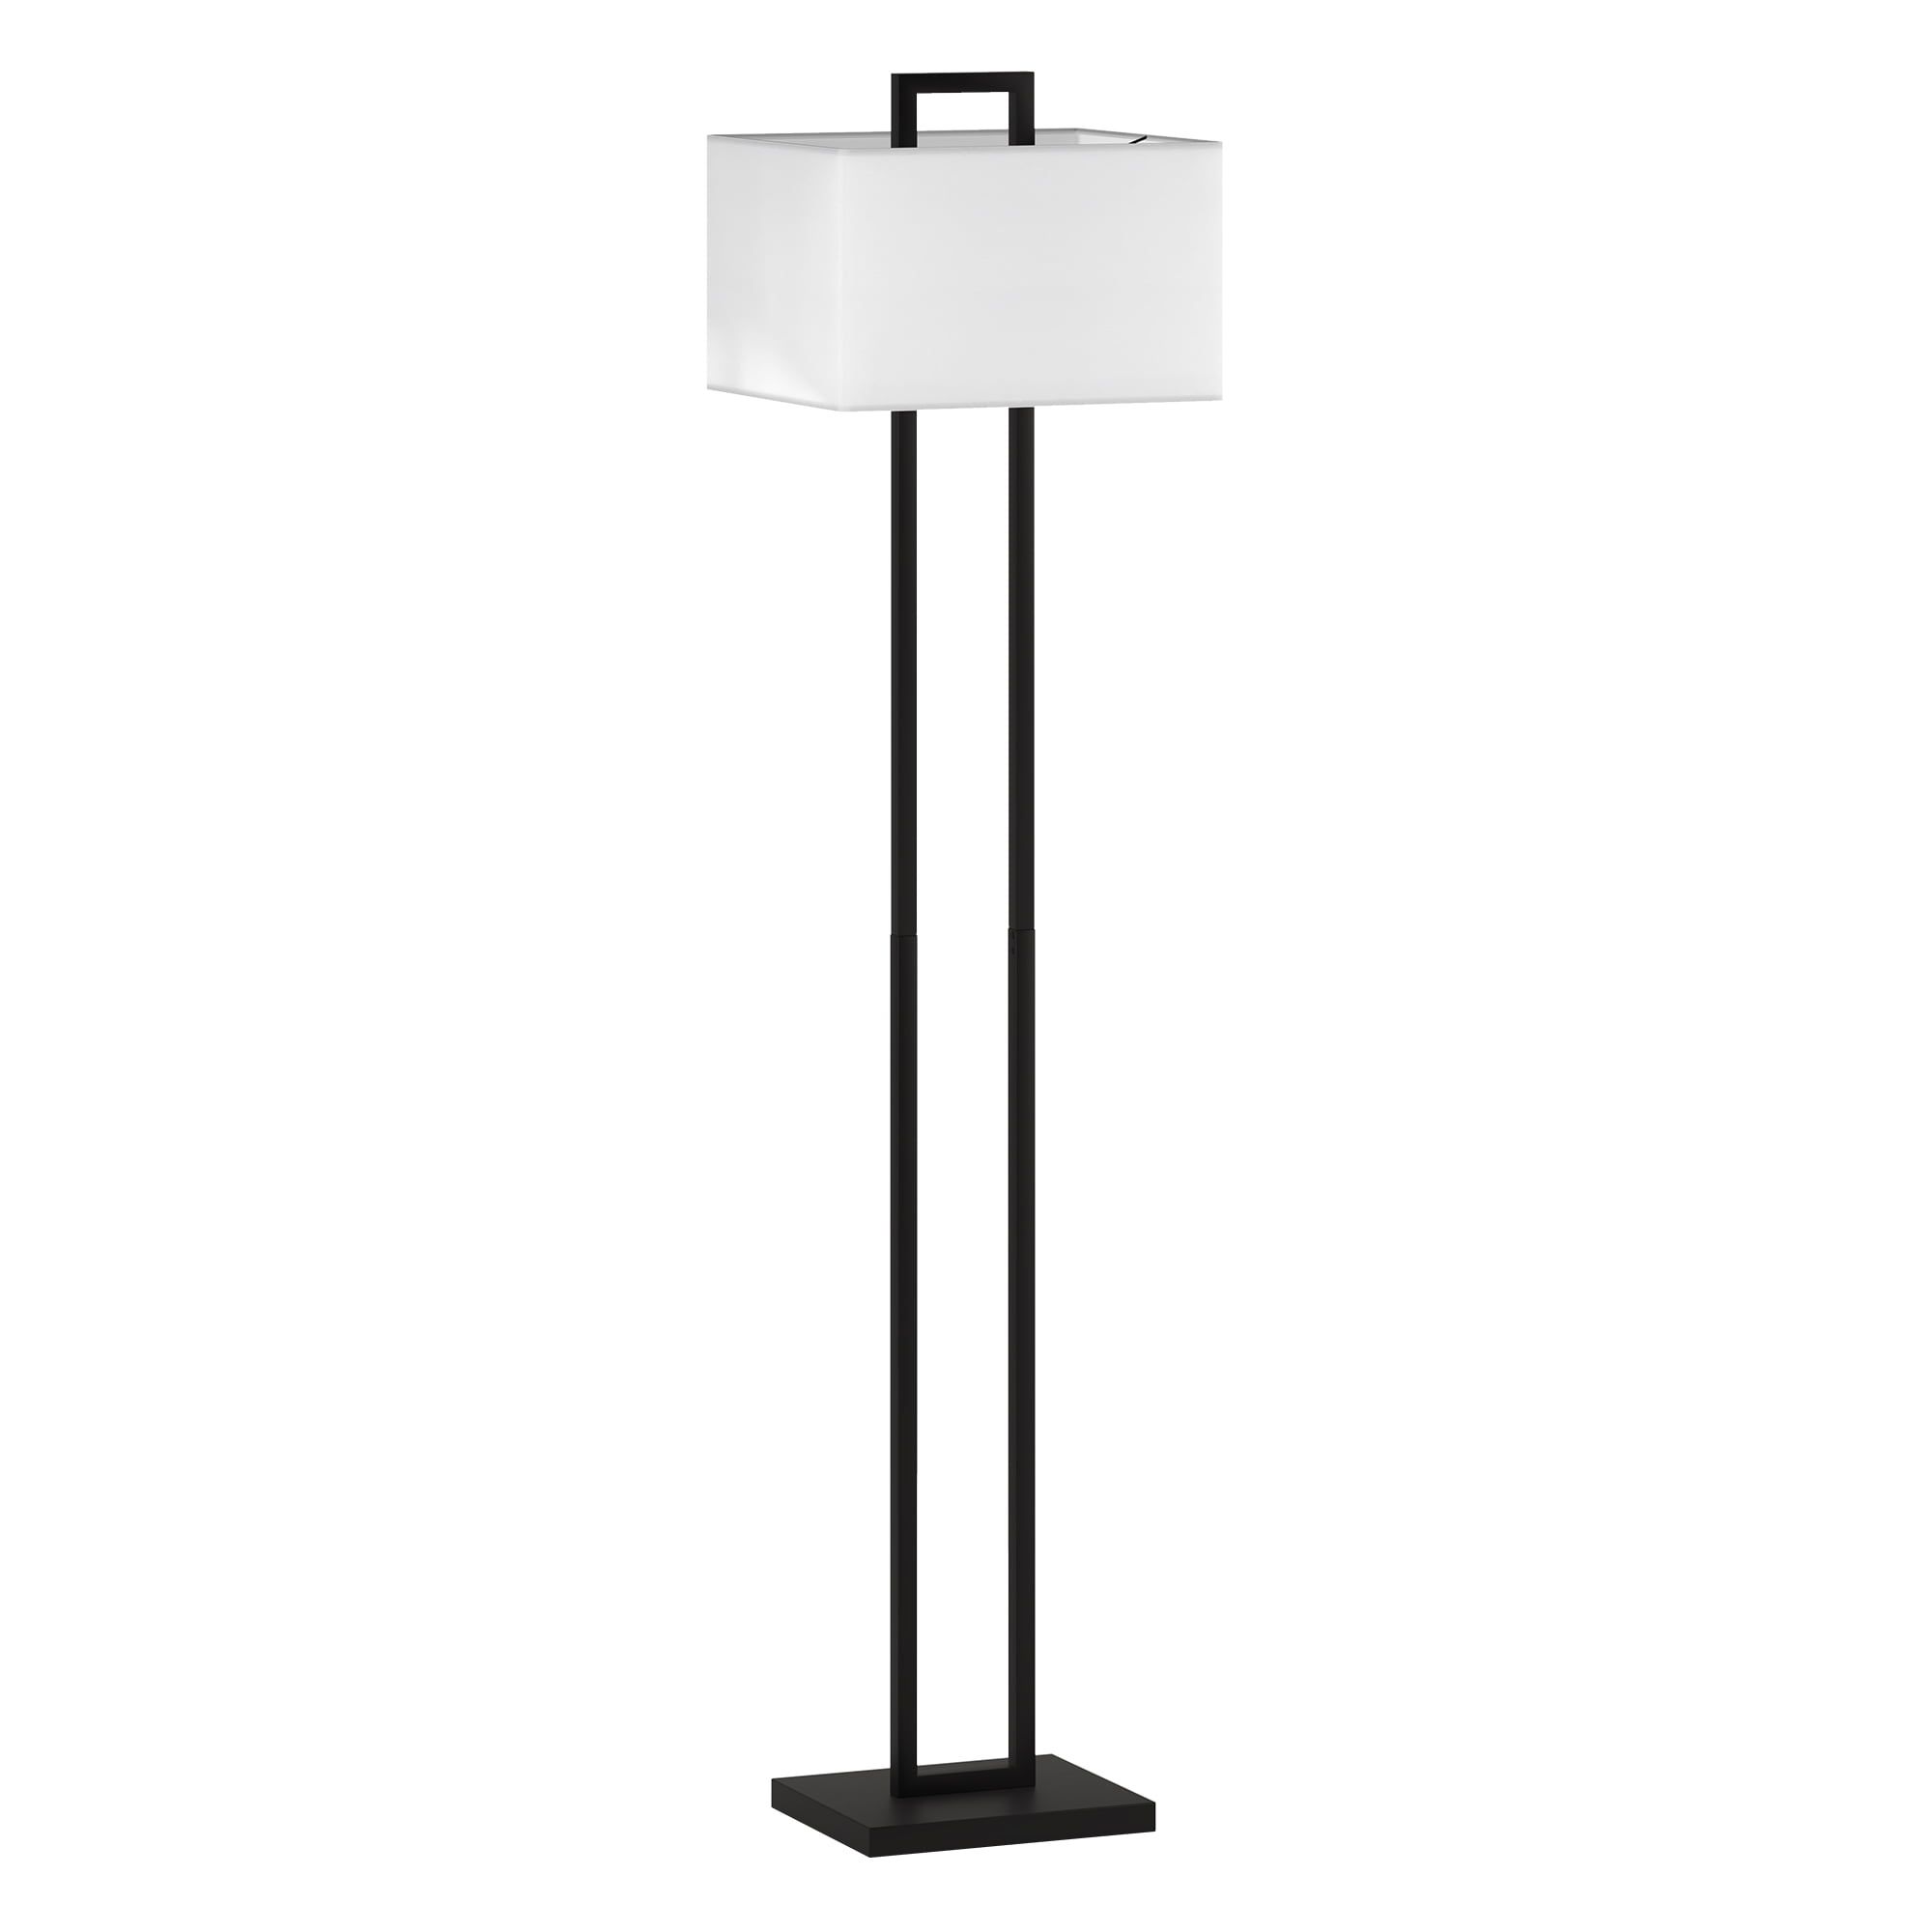 Adair 68" White Linen Shade Modern Arc Floor Lamp with Voice Assistant Compatibility